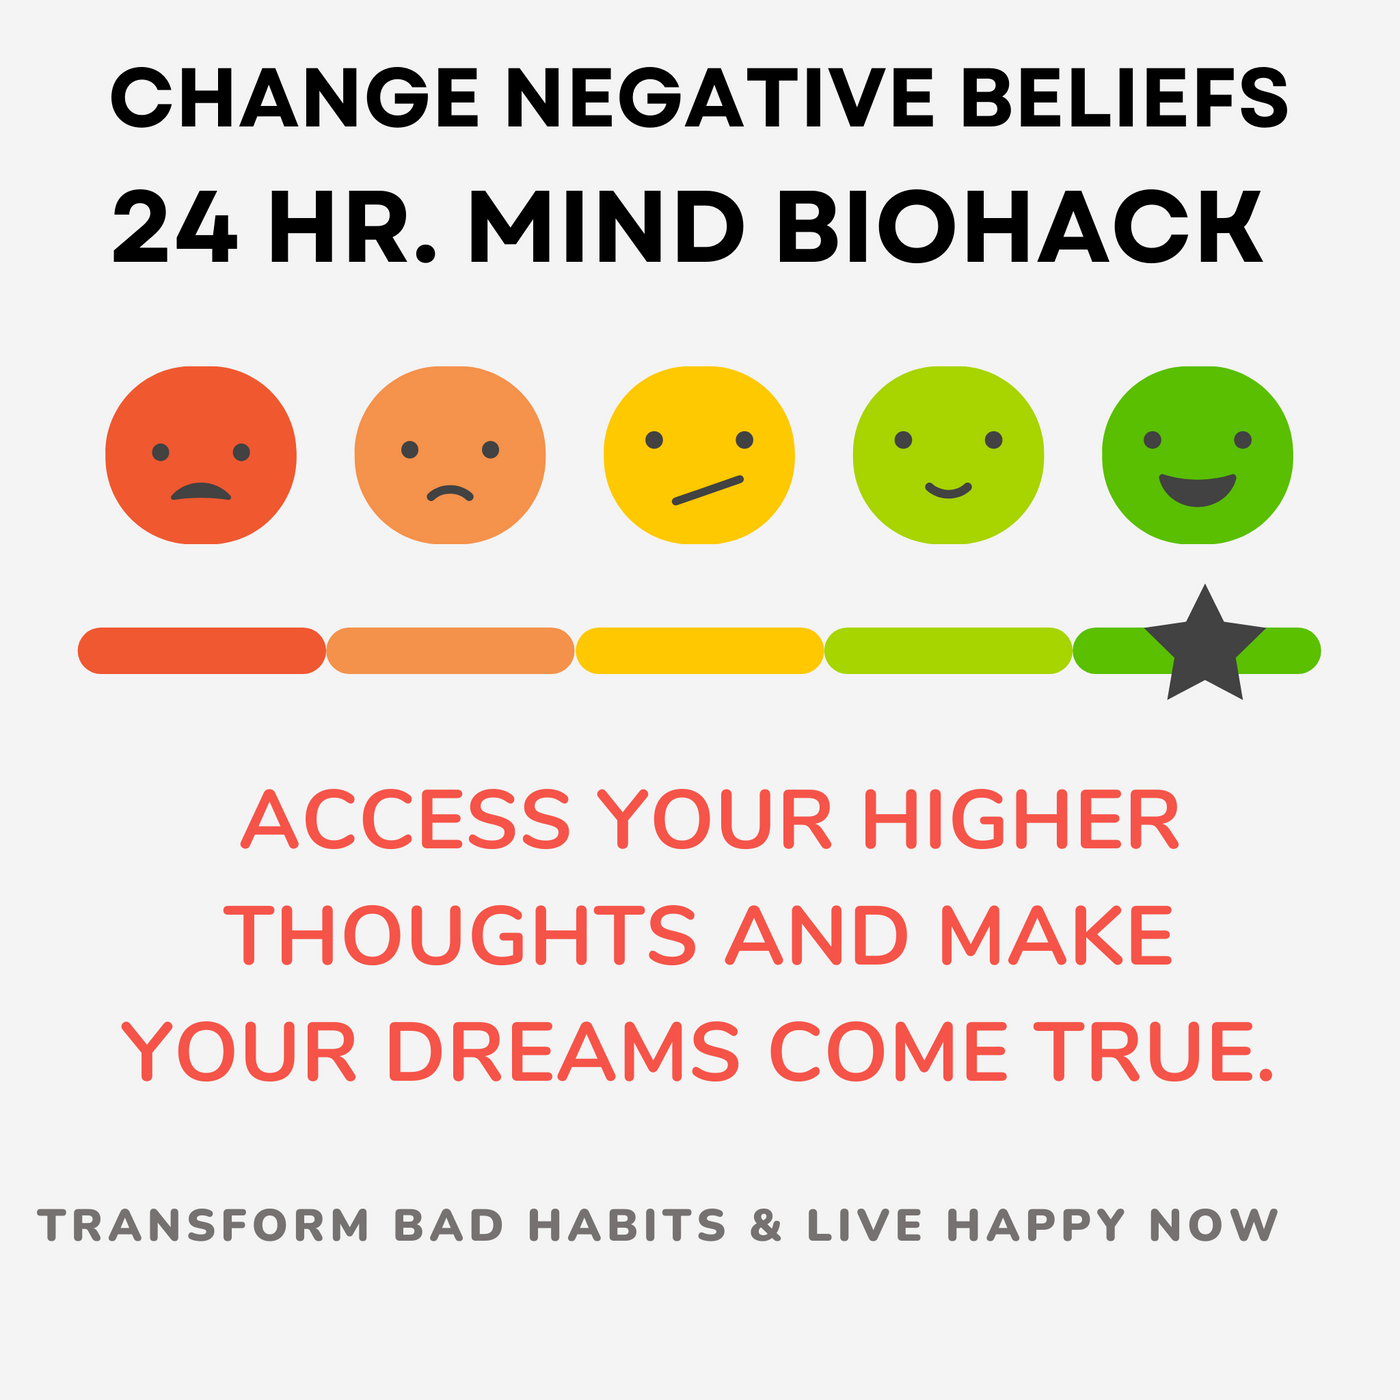 Bio Awareness Hack: Matches your deficient thoughts to new beliefs to overcome fears and manifest dreams. Same Day Data Results